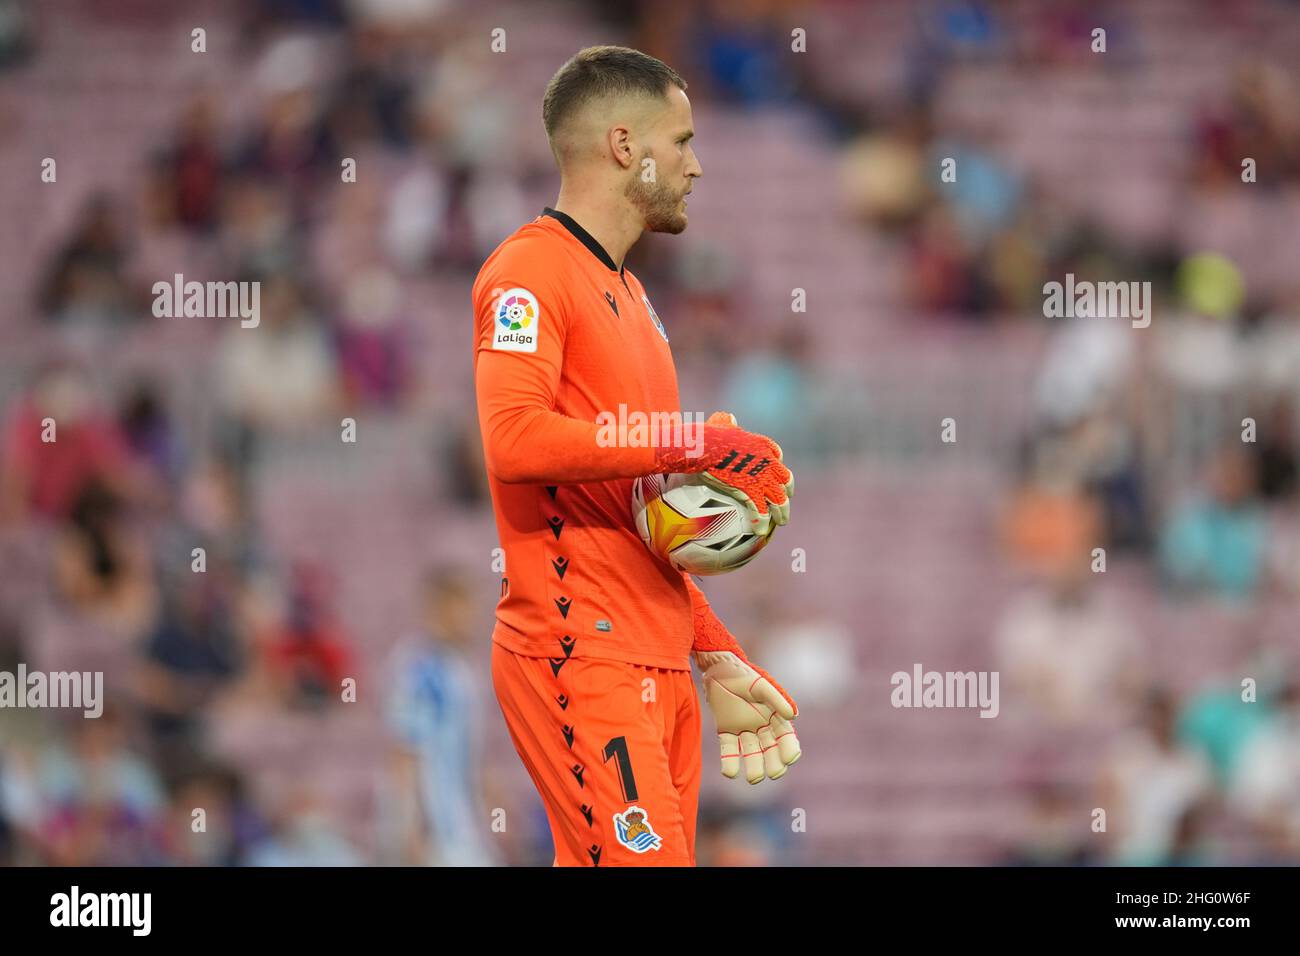 Alejandro Remiro of Real Sociedad during the La Liga match between FC Barcelona and Real Sociedad played at Camp Nou Stadium on August 15, 2021 in Barcelona, Spain. (Photo by PRESSINPHOTO) Stock Photo